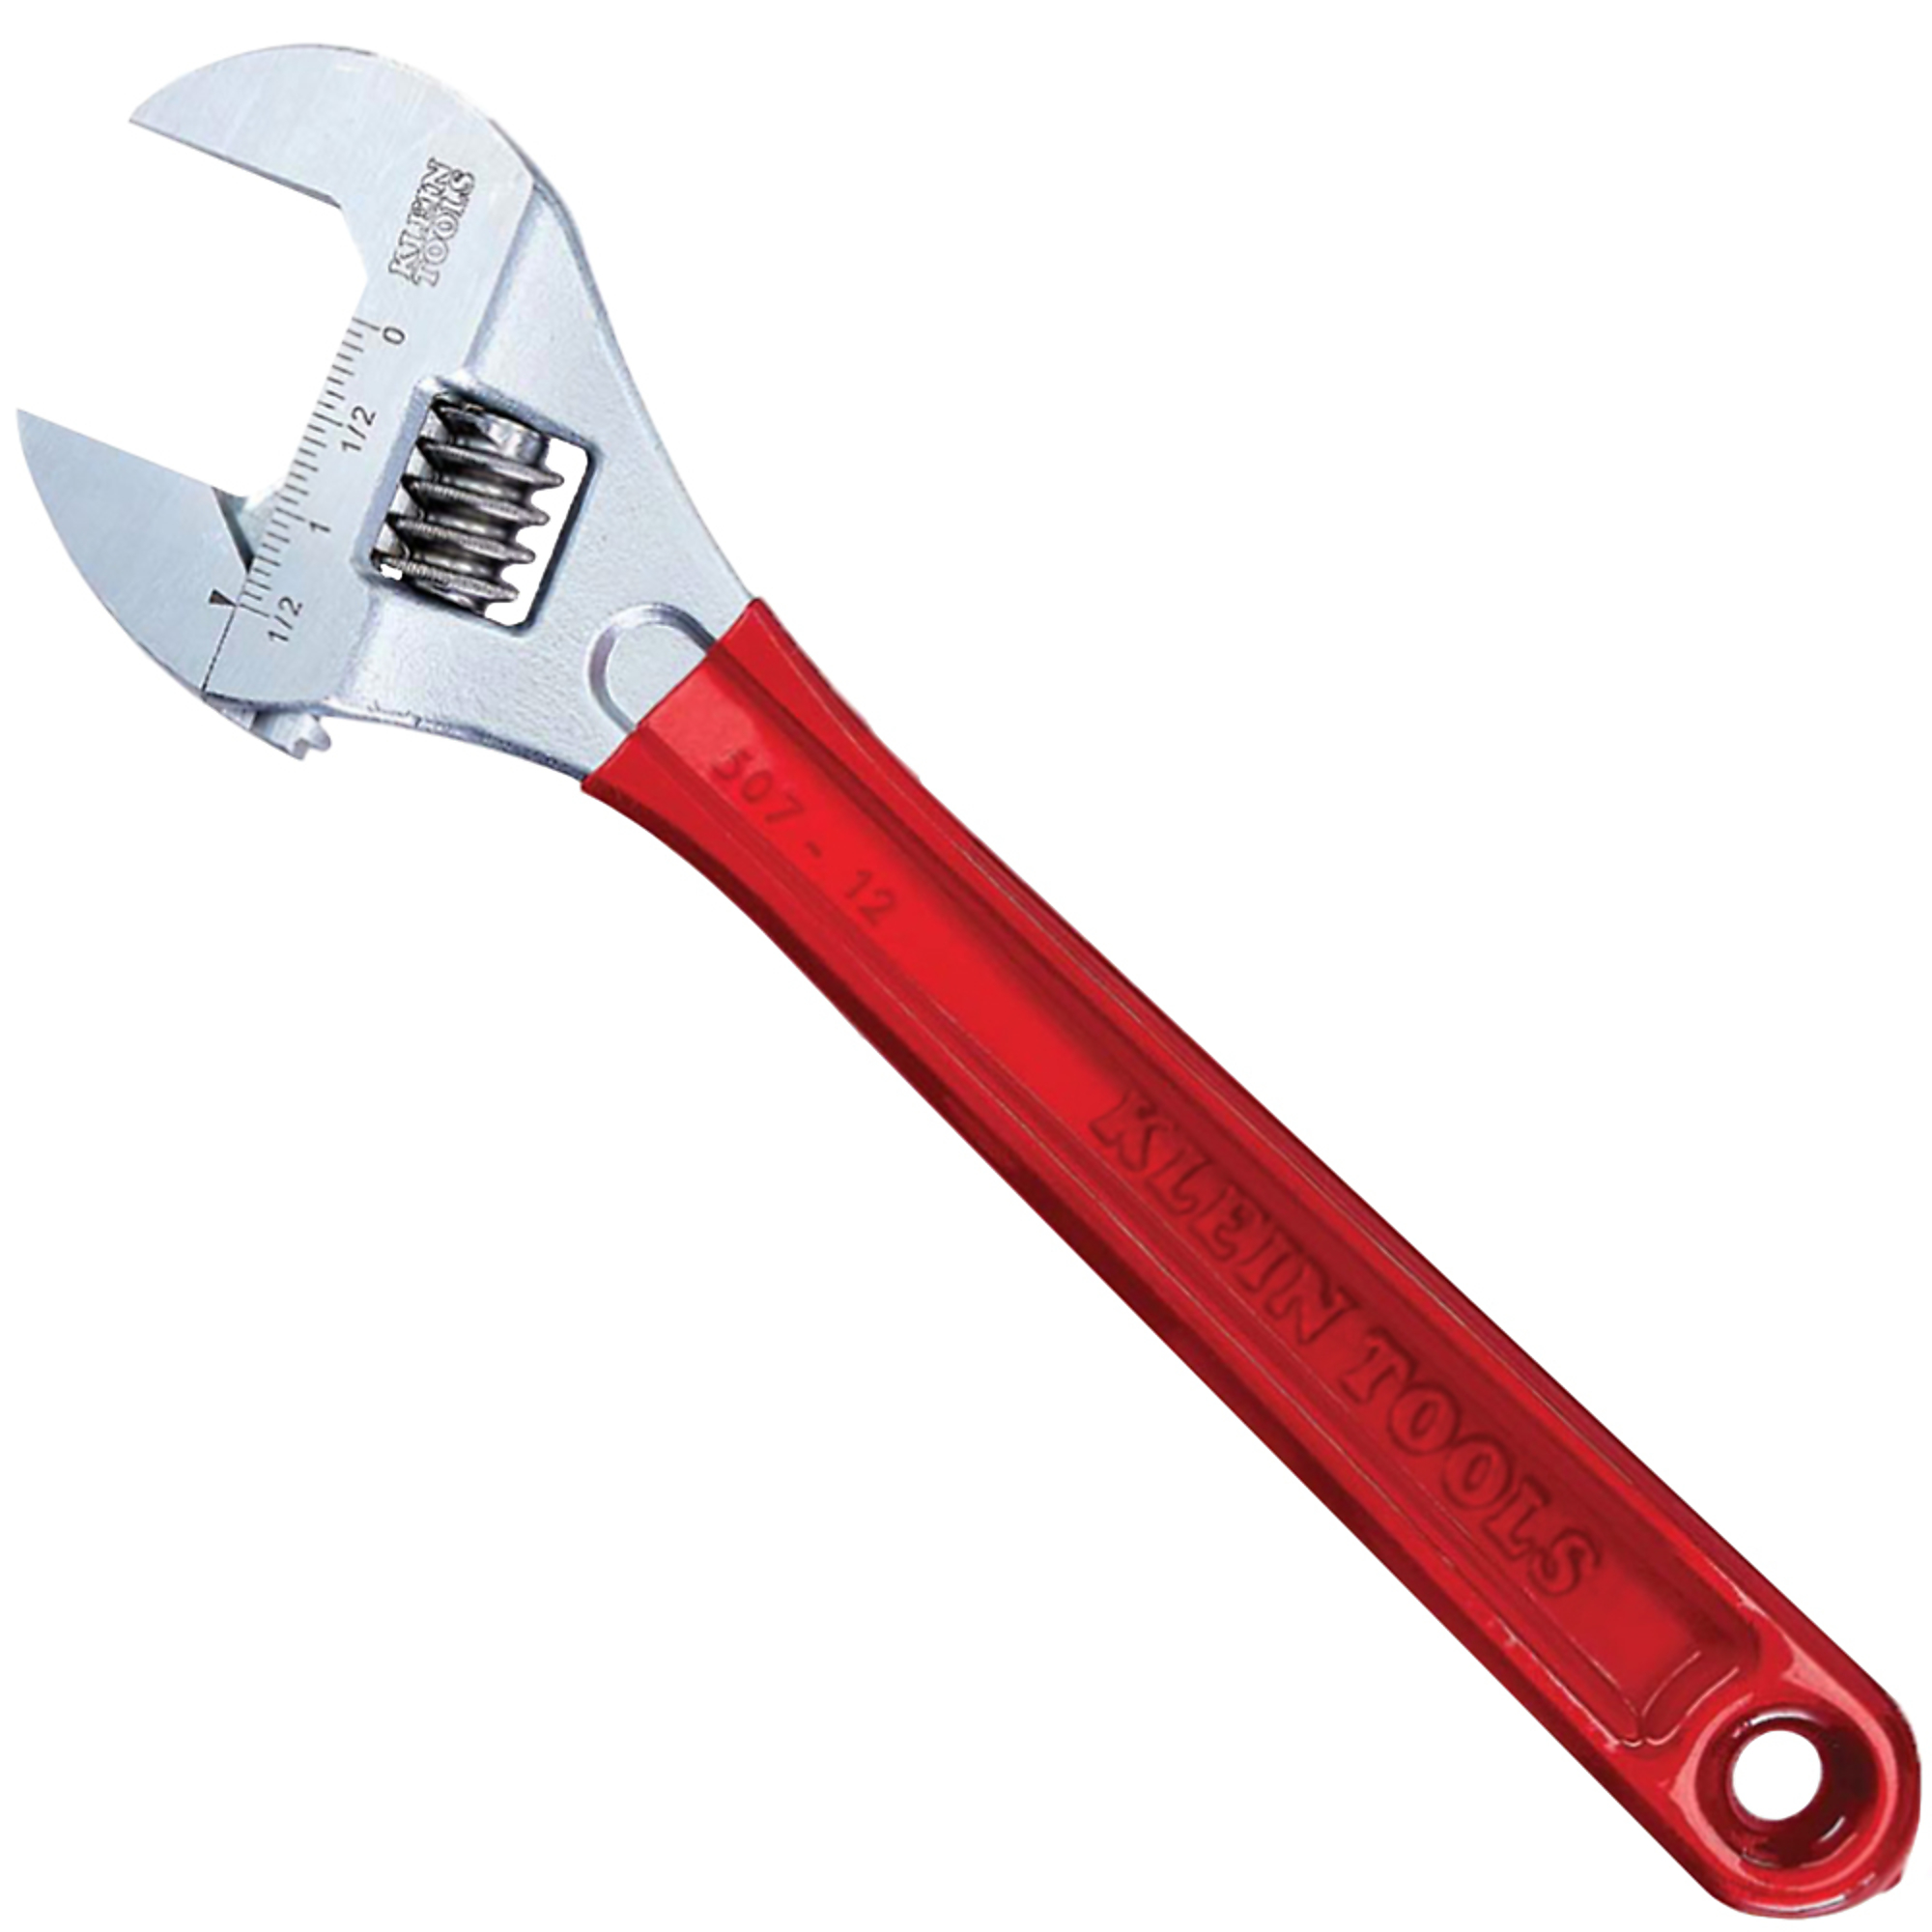 Klein Tools, 12Inch Adj. Wrench Extra Capacity, Pieces (qty.) 1 Tool Length 12.35 in, Measurement Standard Standard (SAE), Model D507-12